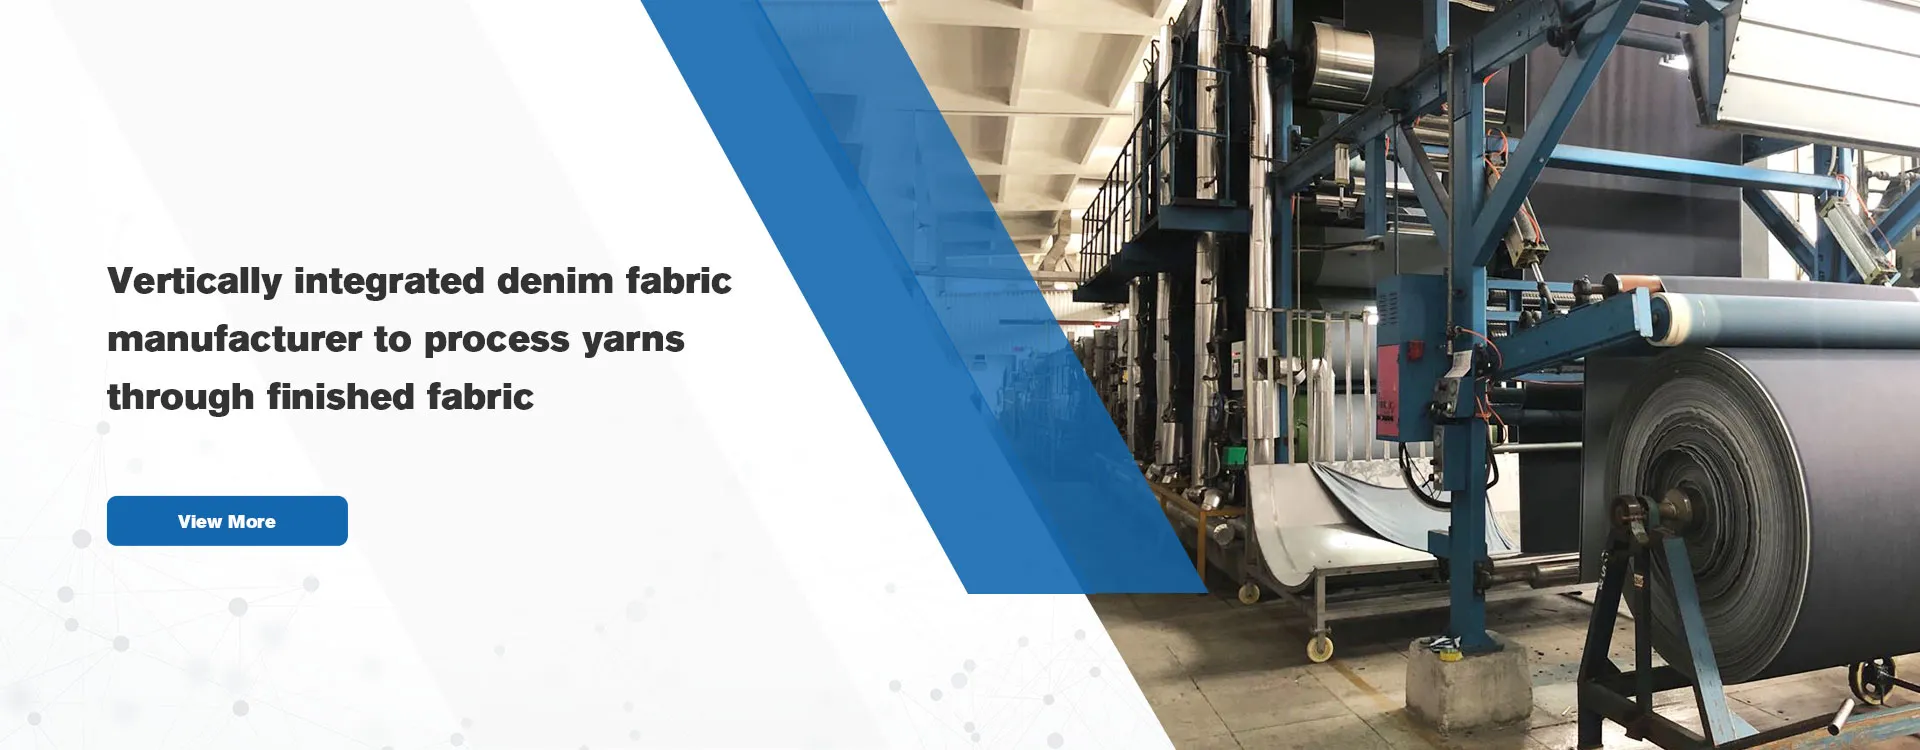 Vertically integrated denim fabric manufacturer to process yarns through finished fabric